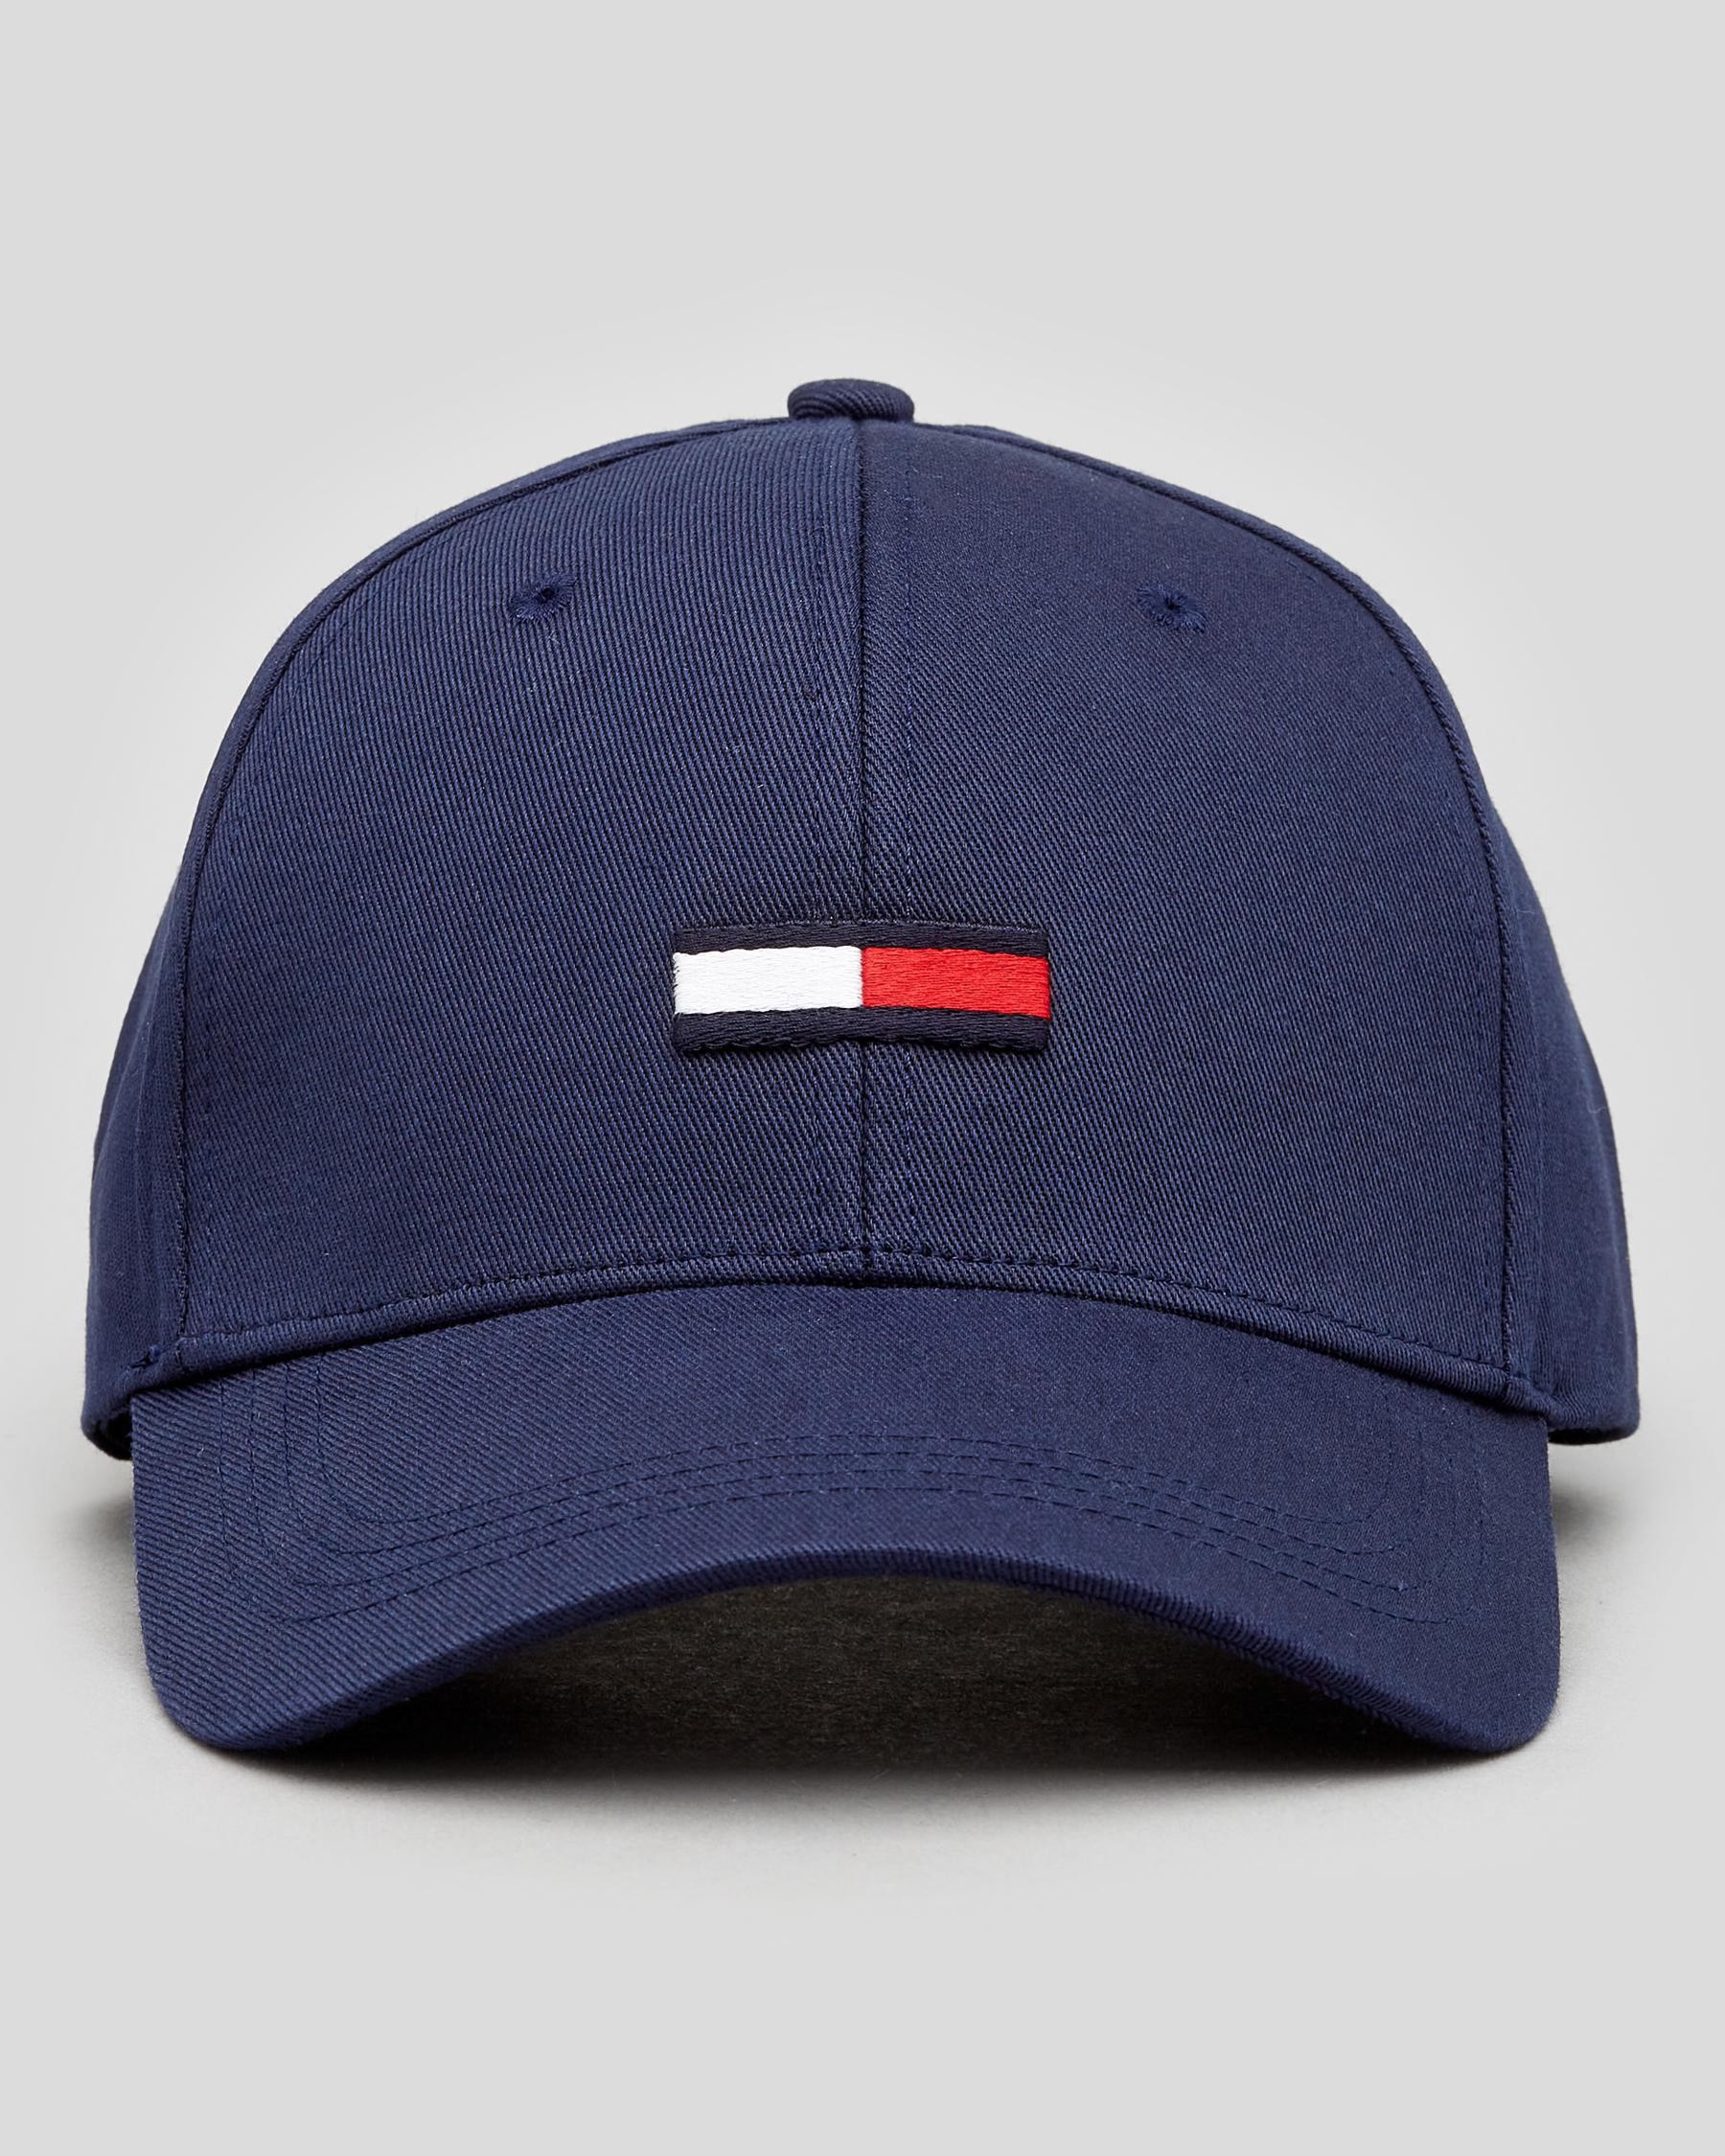 Tommy Hilfiger TJM Flag Cap City United - Easy In Beach Shipping Navy Twilight Returns & FREE* - States